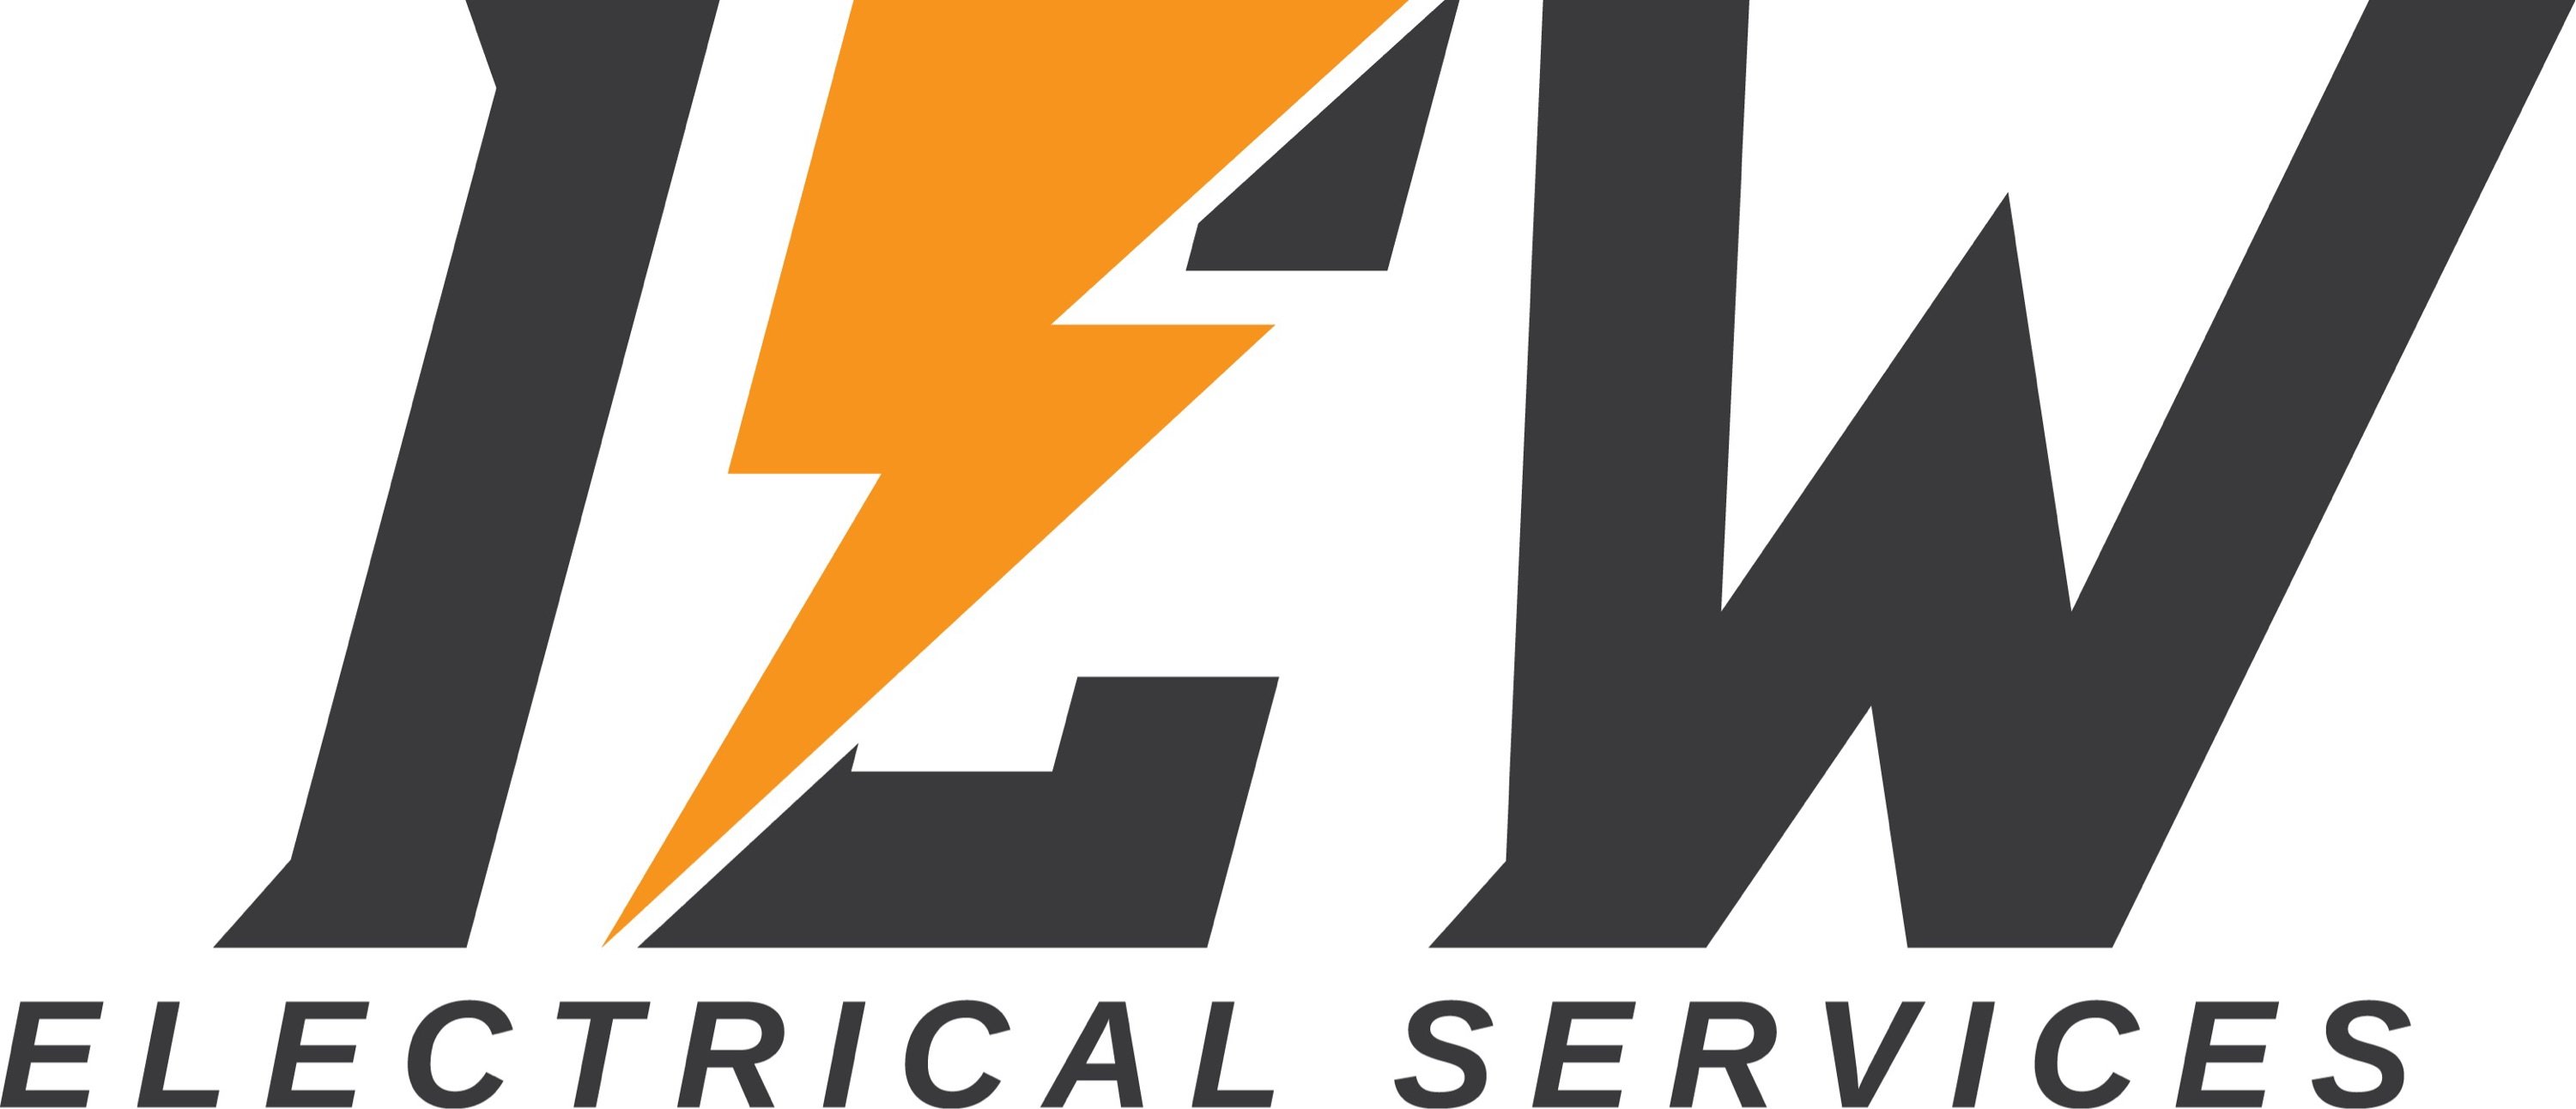 IEW Electrical Services Logo